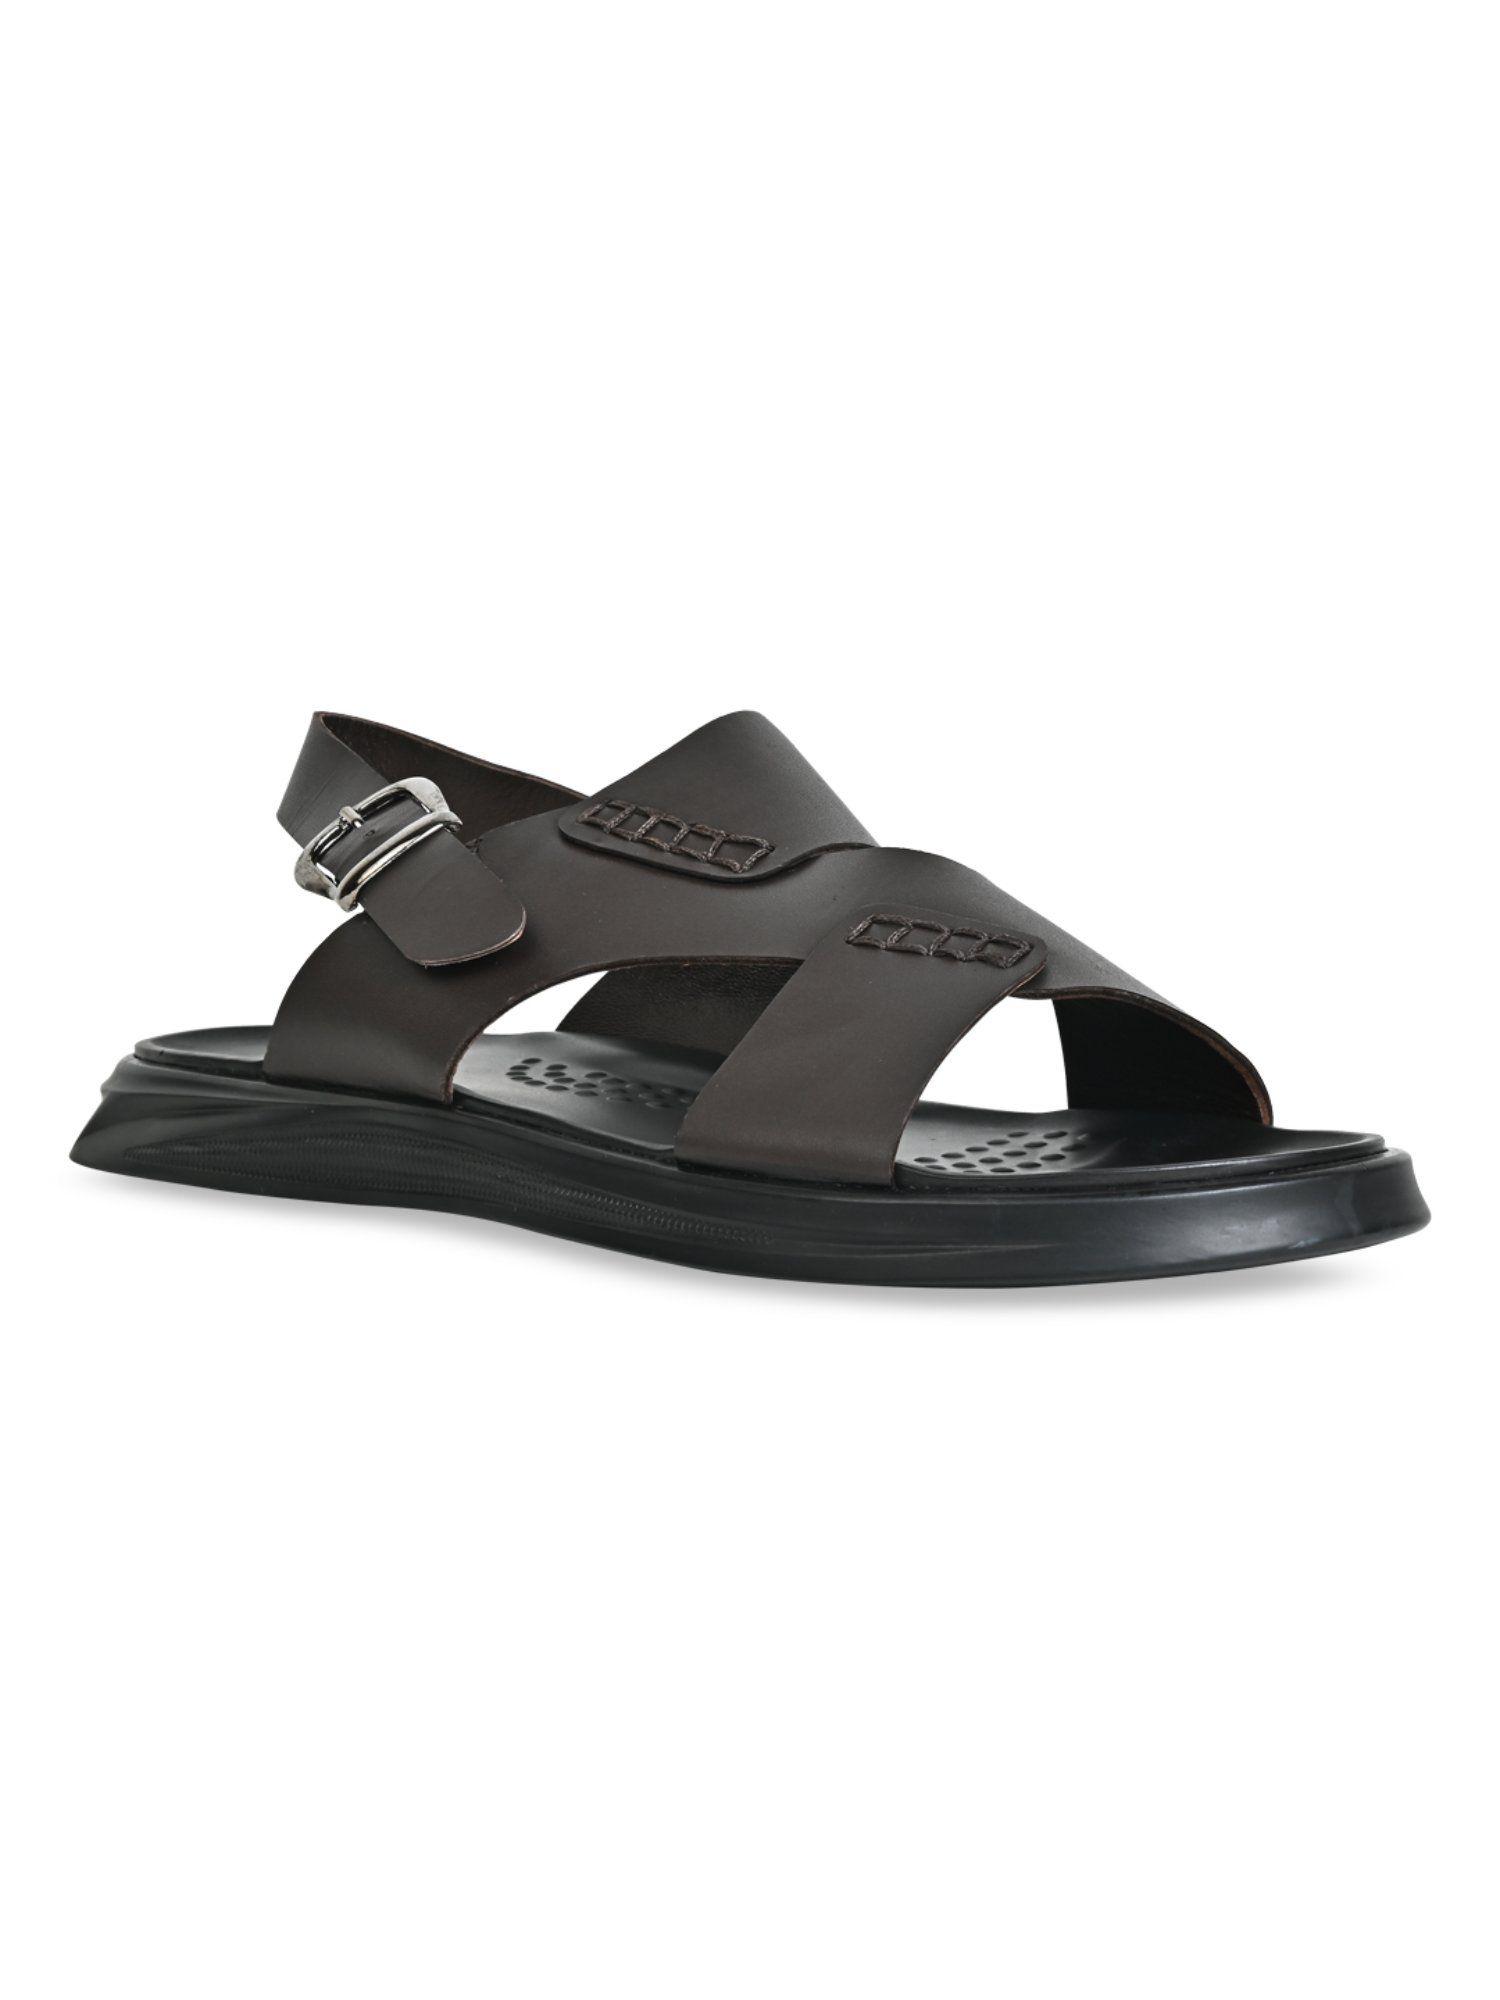 brown-men-casual-leather-back-strap-sandals